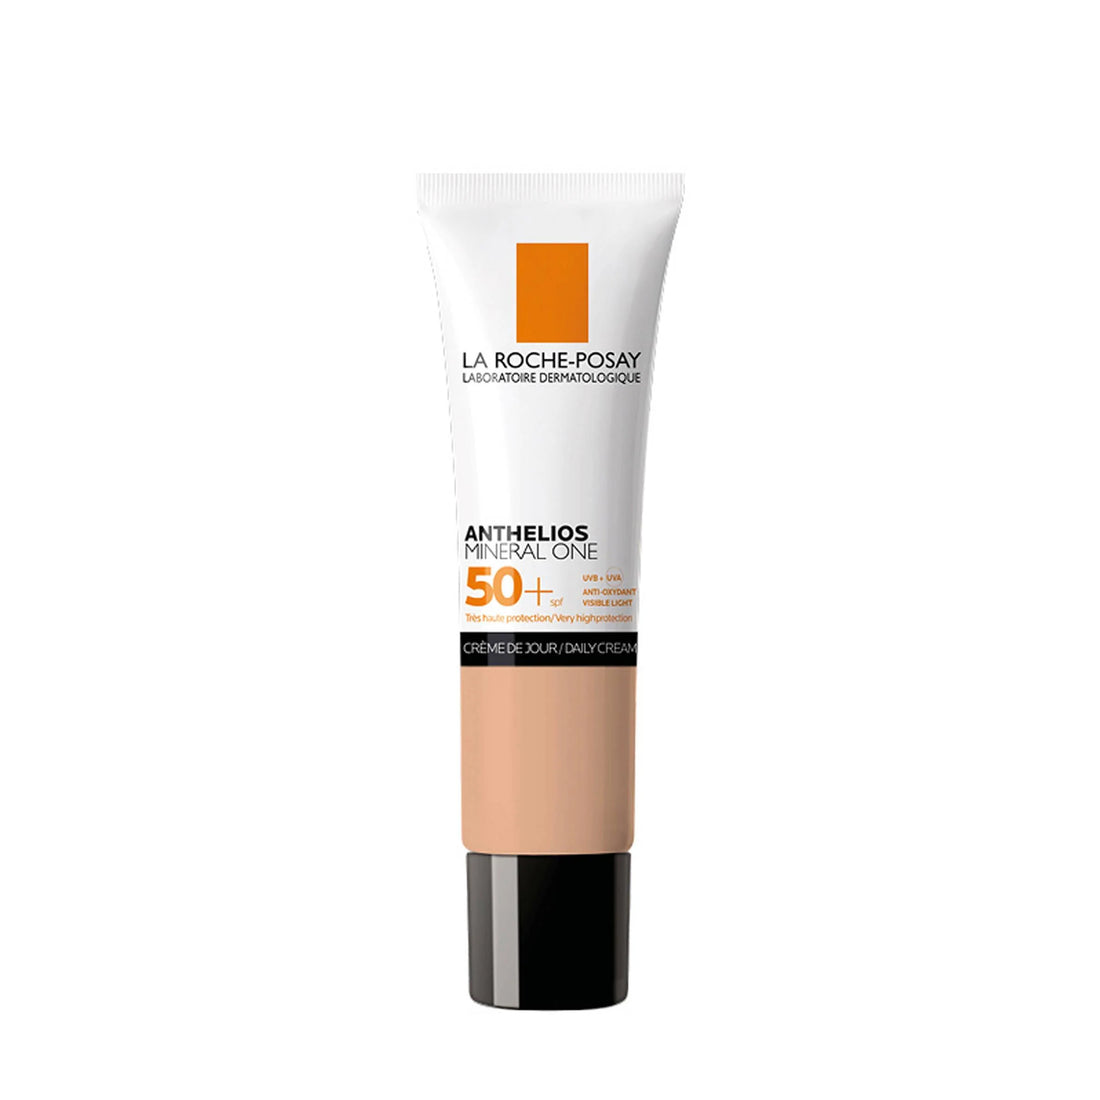 La Roche-Posay Anthelios Mineral One SPF50+ Tinted Cream 03 Tan 30ml